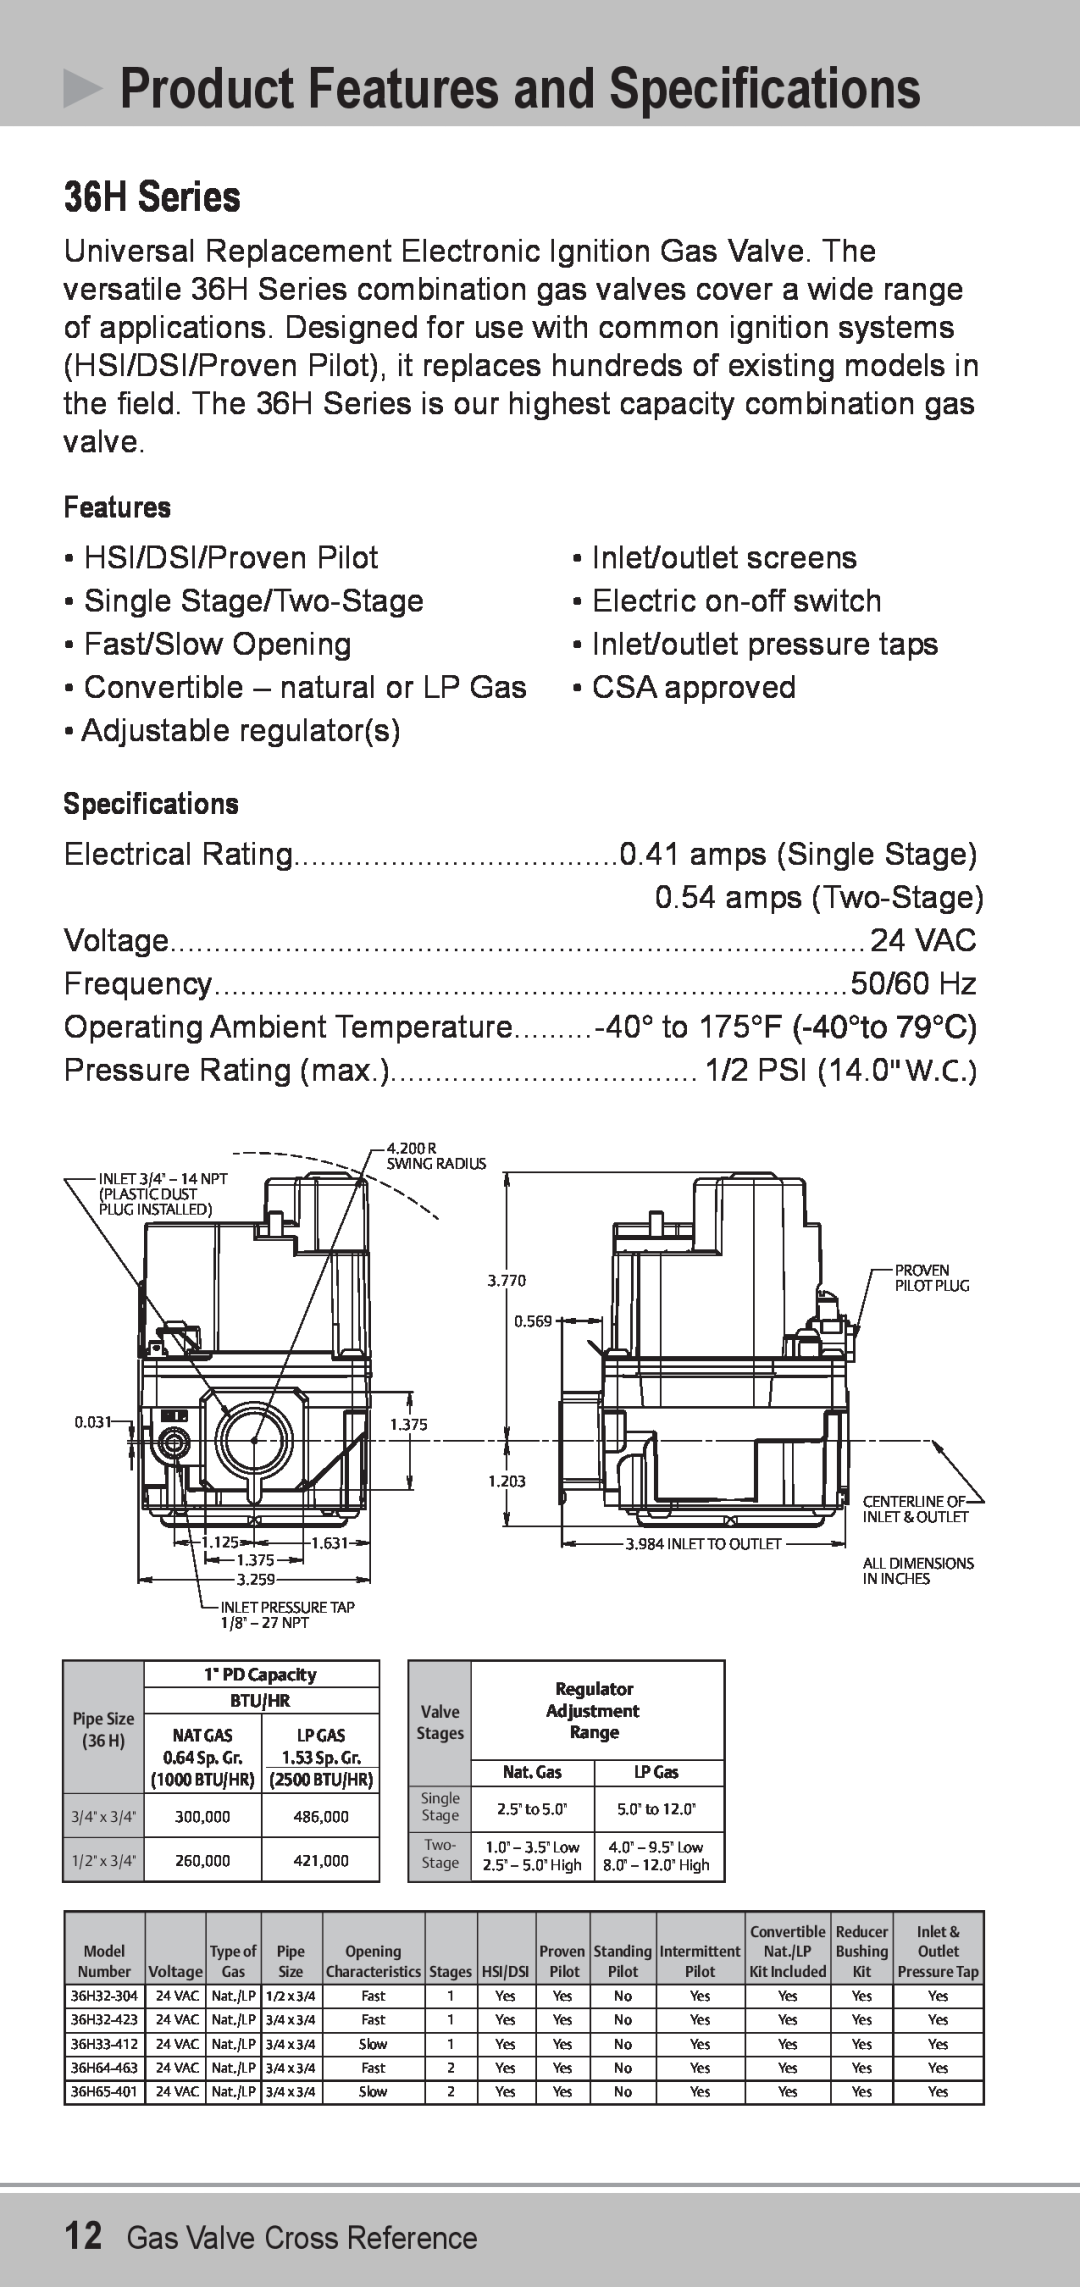 Emerson 36J manual 36H Series, Product Features and Specifications 